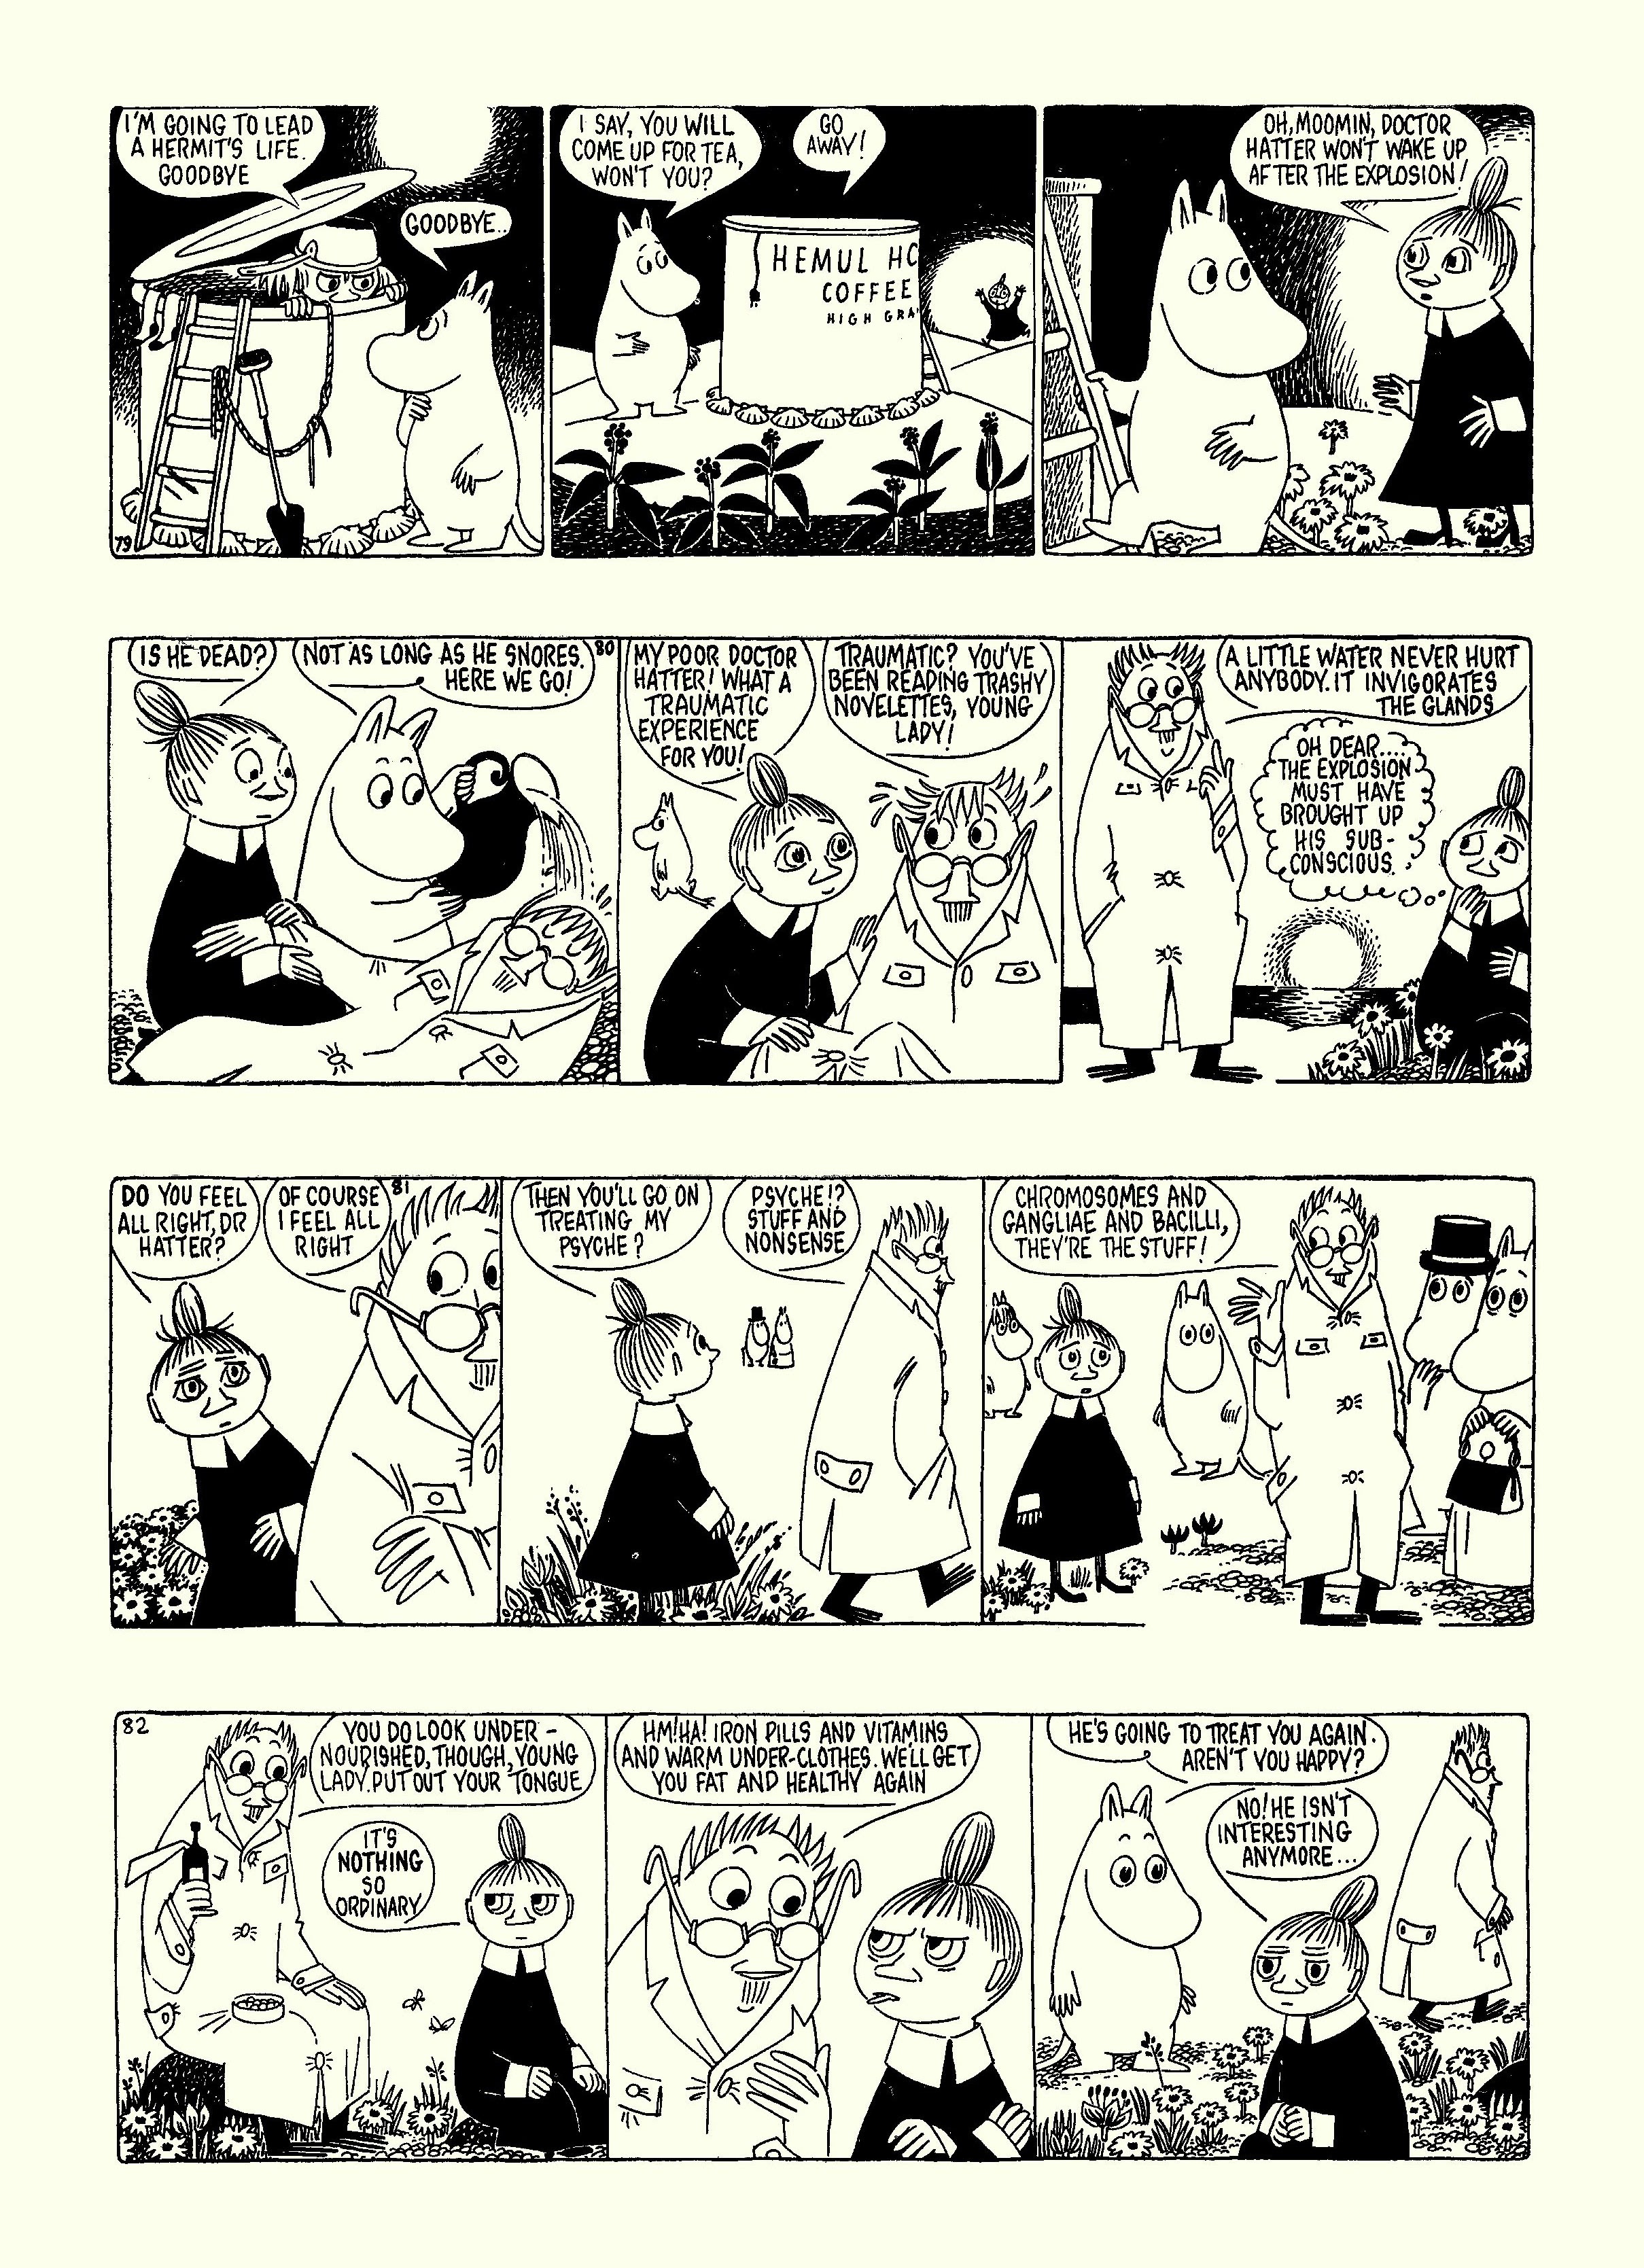 Read online Moomin: The Complete Tove Jansson Comic Strip comic -  Issue # TPB 5 - 77